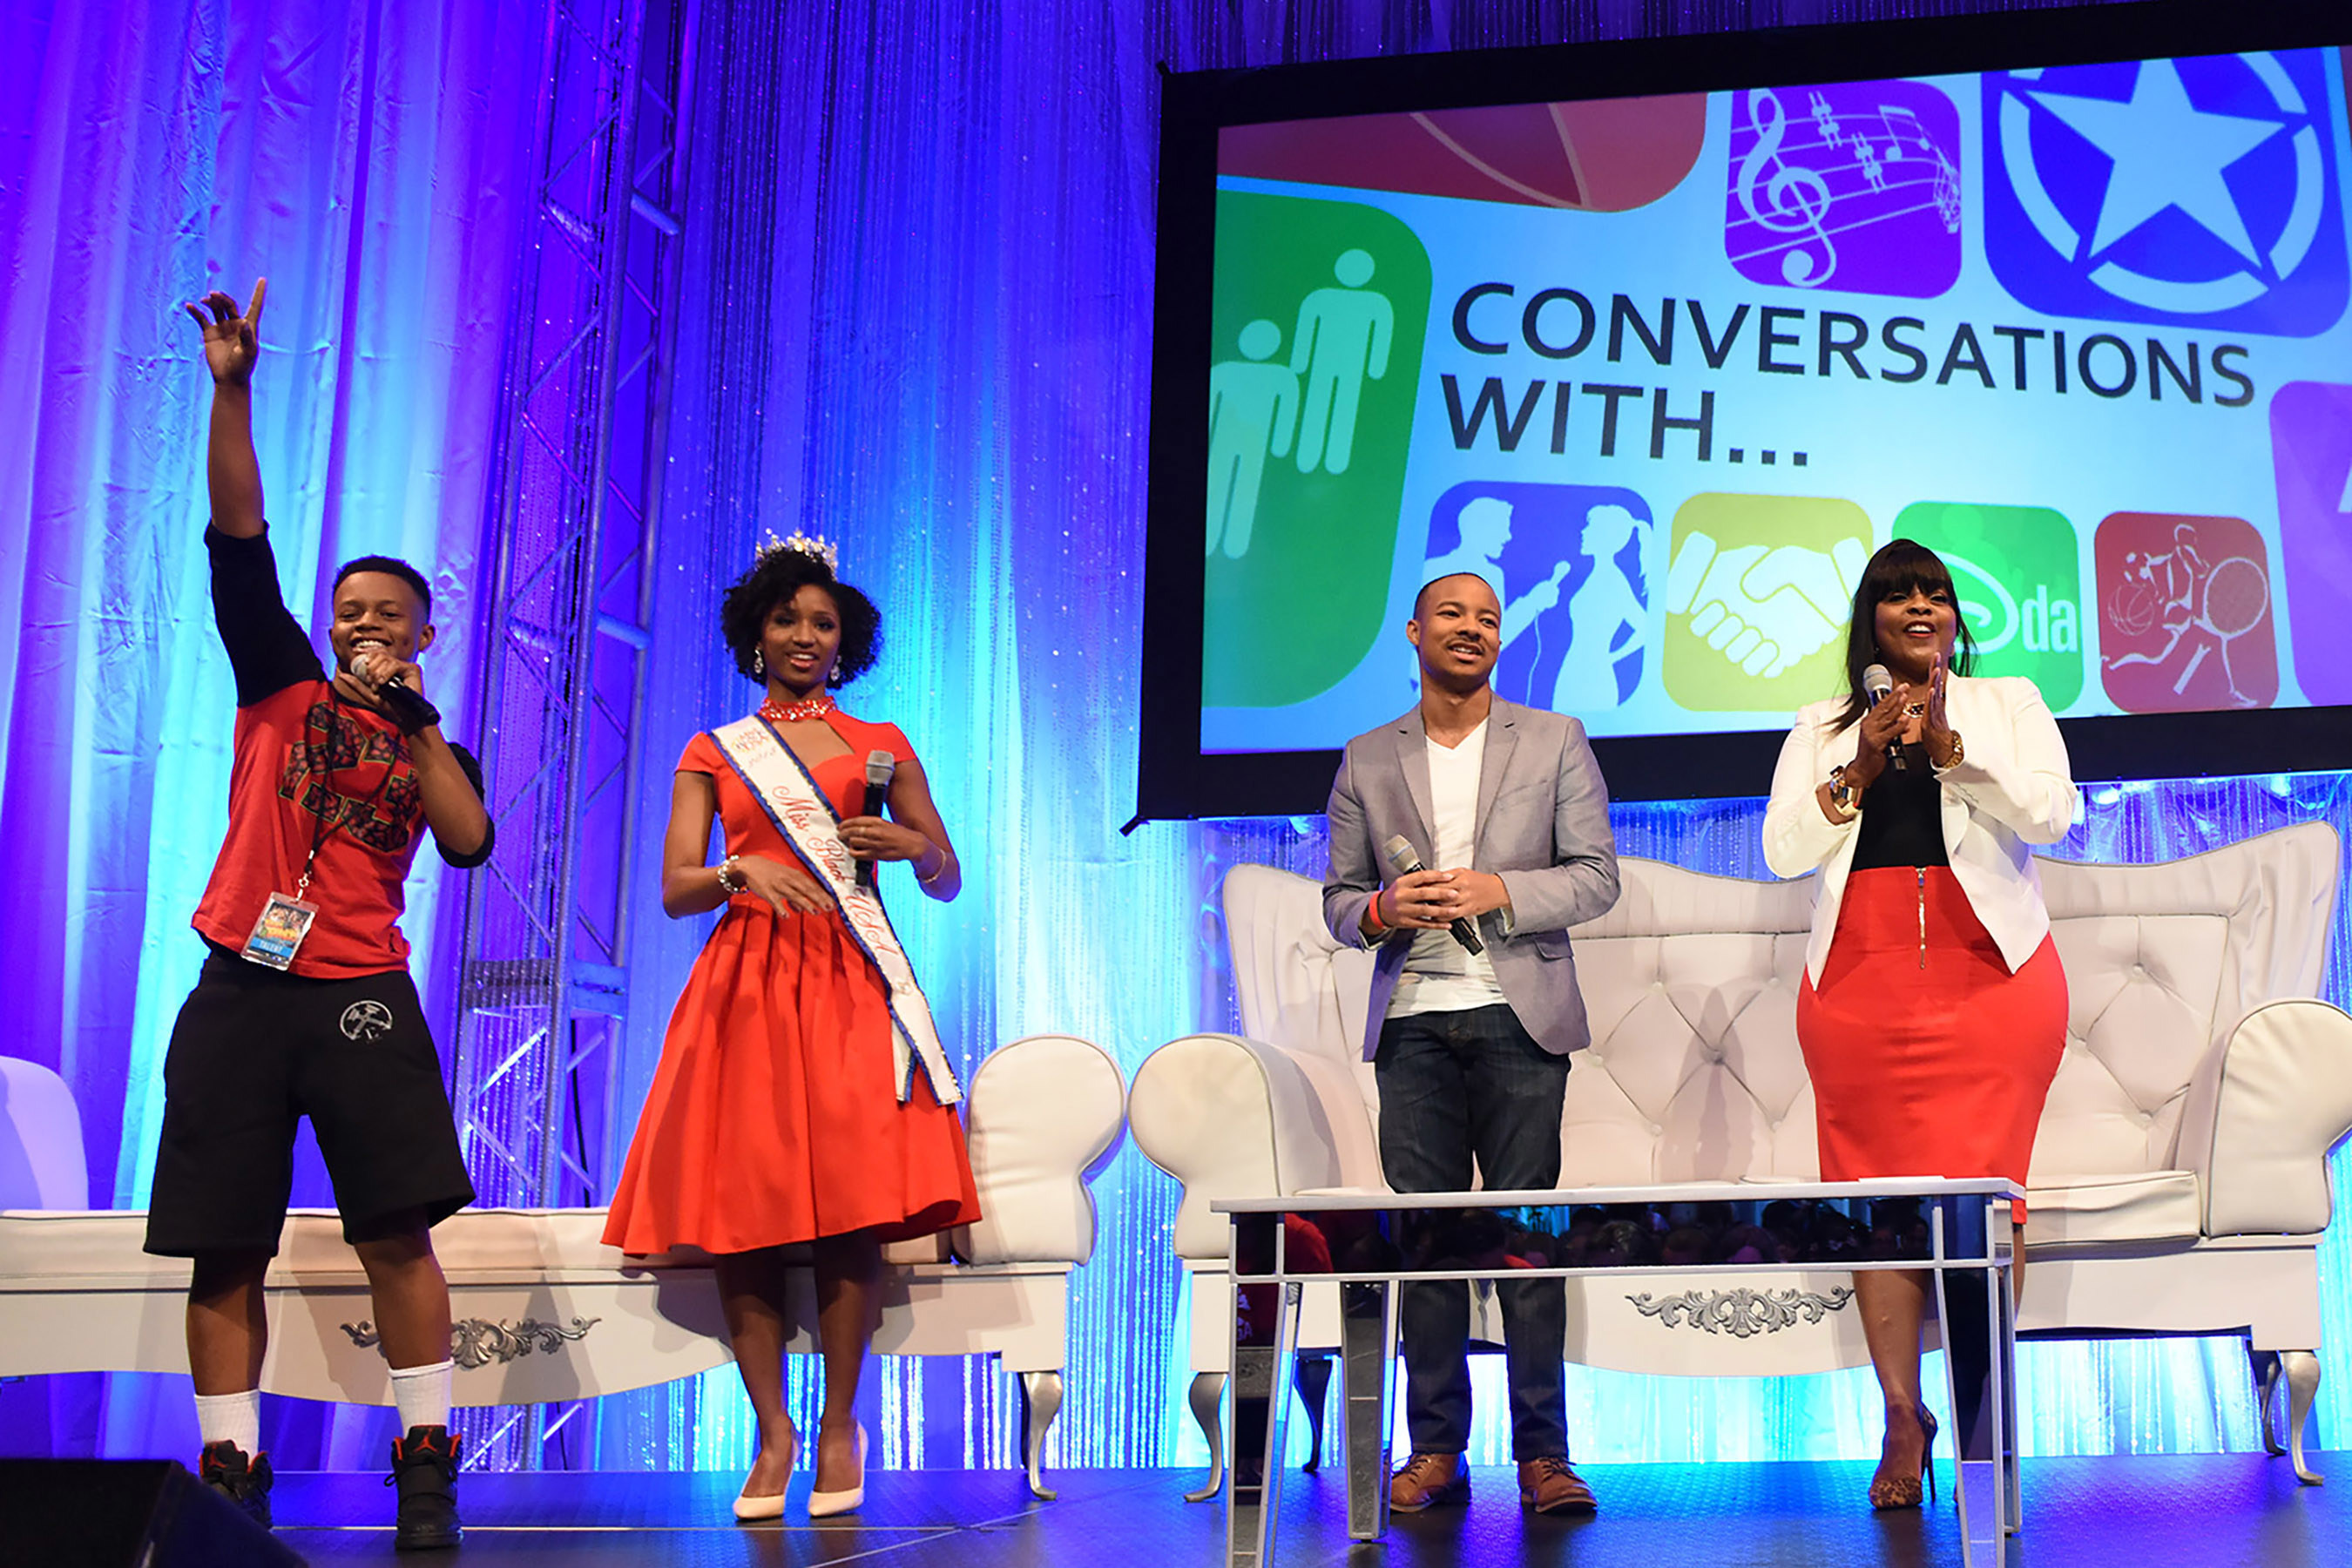 Celebrity Panel at Disney Dreamers Academy L-R: Singer and rapper Silento, Miss Black USA 2015 Madison Gibbs, entrepreneur and motivational speaker Jaylen Bledsoe, and actress Brely Evans participate in a panel discussion March 5, 2016 during Disney's Dreamers Academy with Steve Harvey and Essence Magazine at Epcot in Lake Buena Vista, Fla. The ninth annual event, taking place March 3-6, 2016, is a career-inspiration program for distinguished high school students from across the U.S. (Todd Anderson...